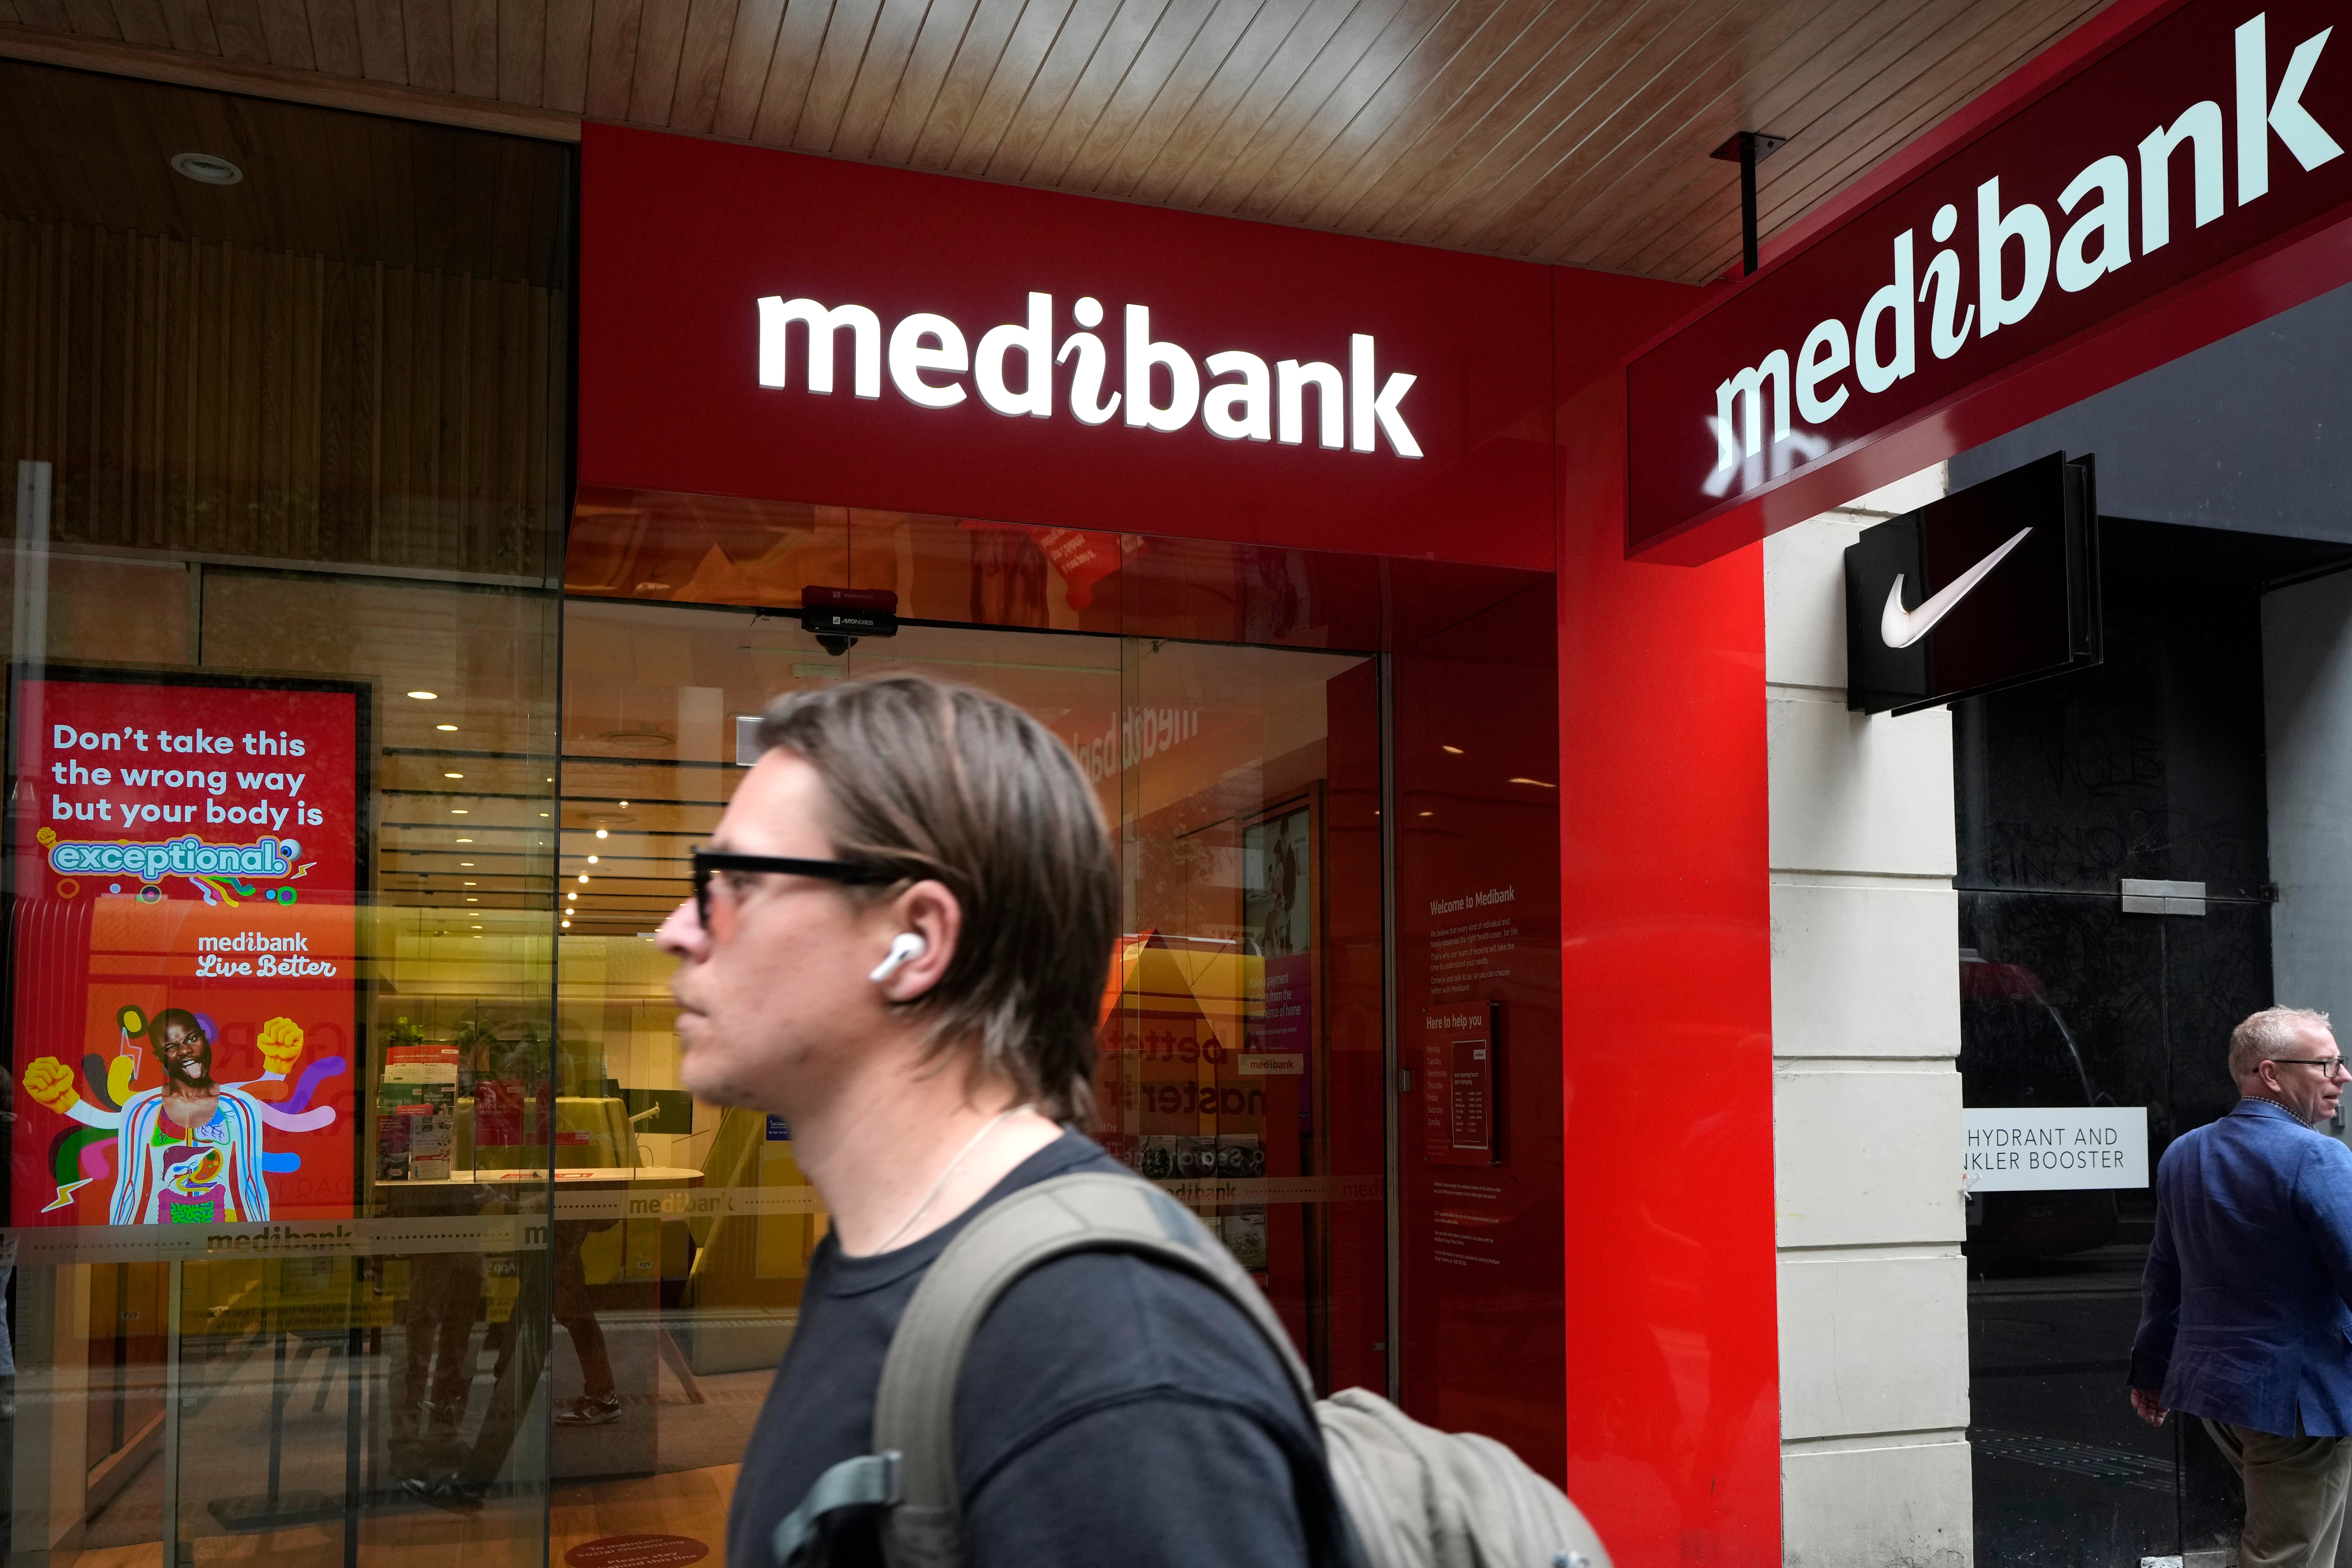 Hackers are demanding AU$14m from Medibank to stop leaking stolen information about clients